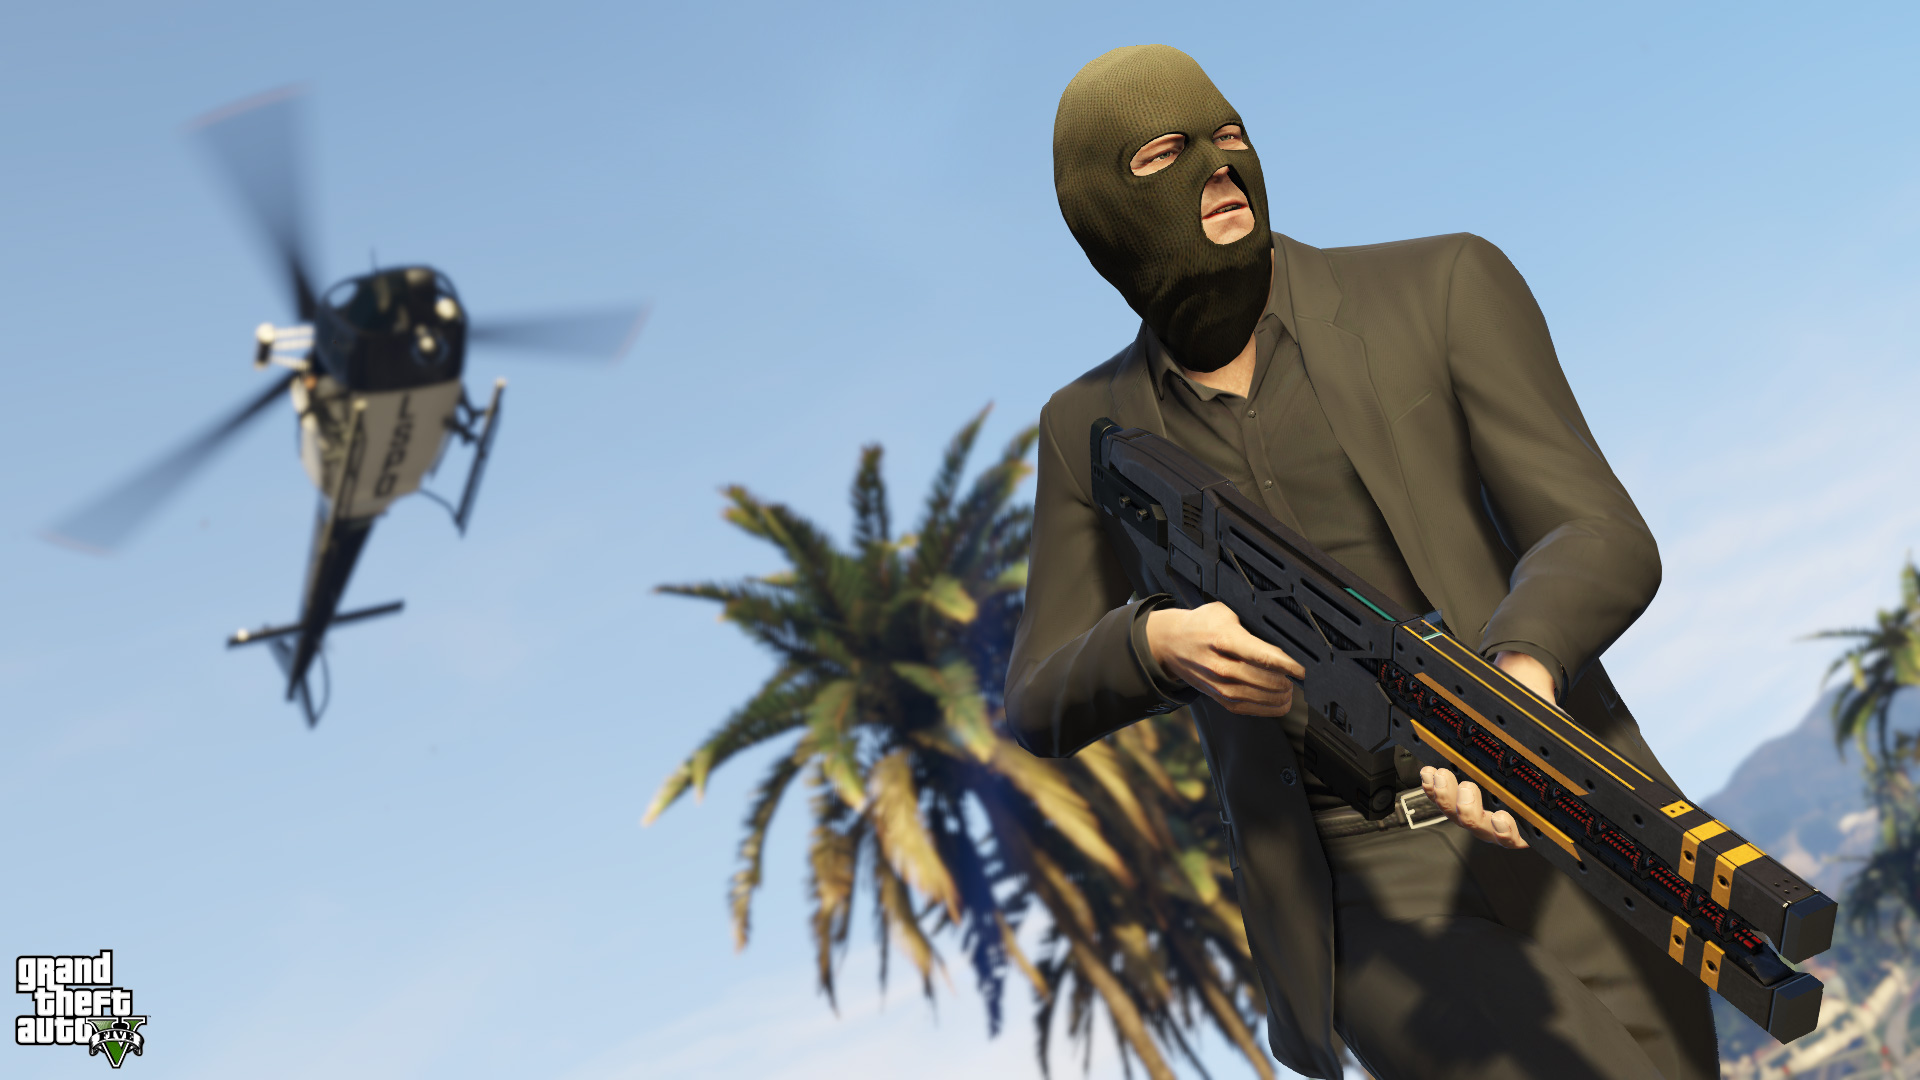 Details Exclusive Content for Returning GTAV Players on PS4, Xbox One and PC - Rockstar